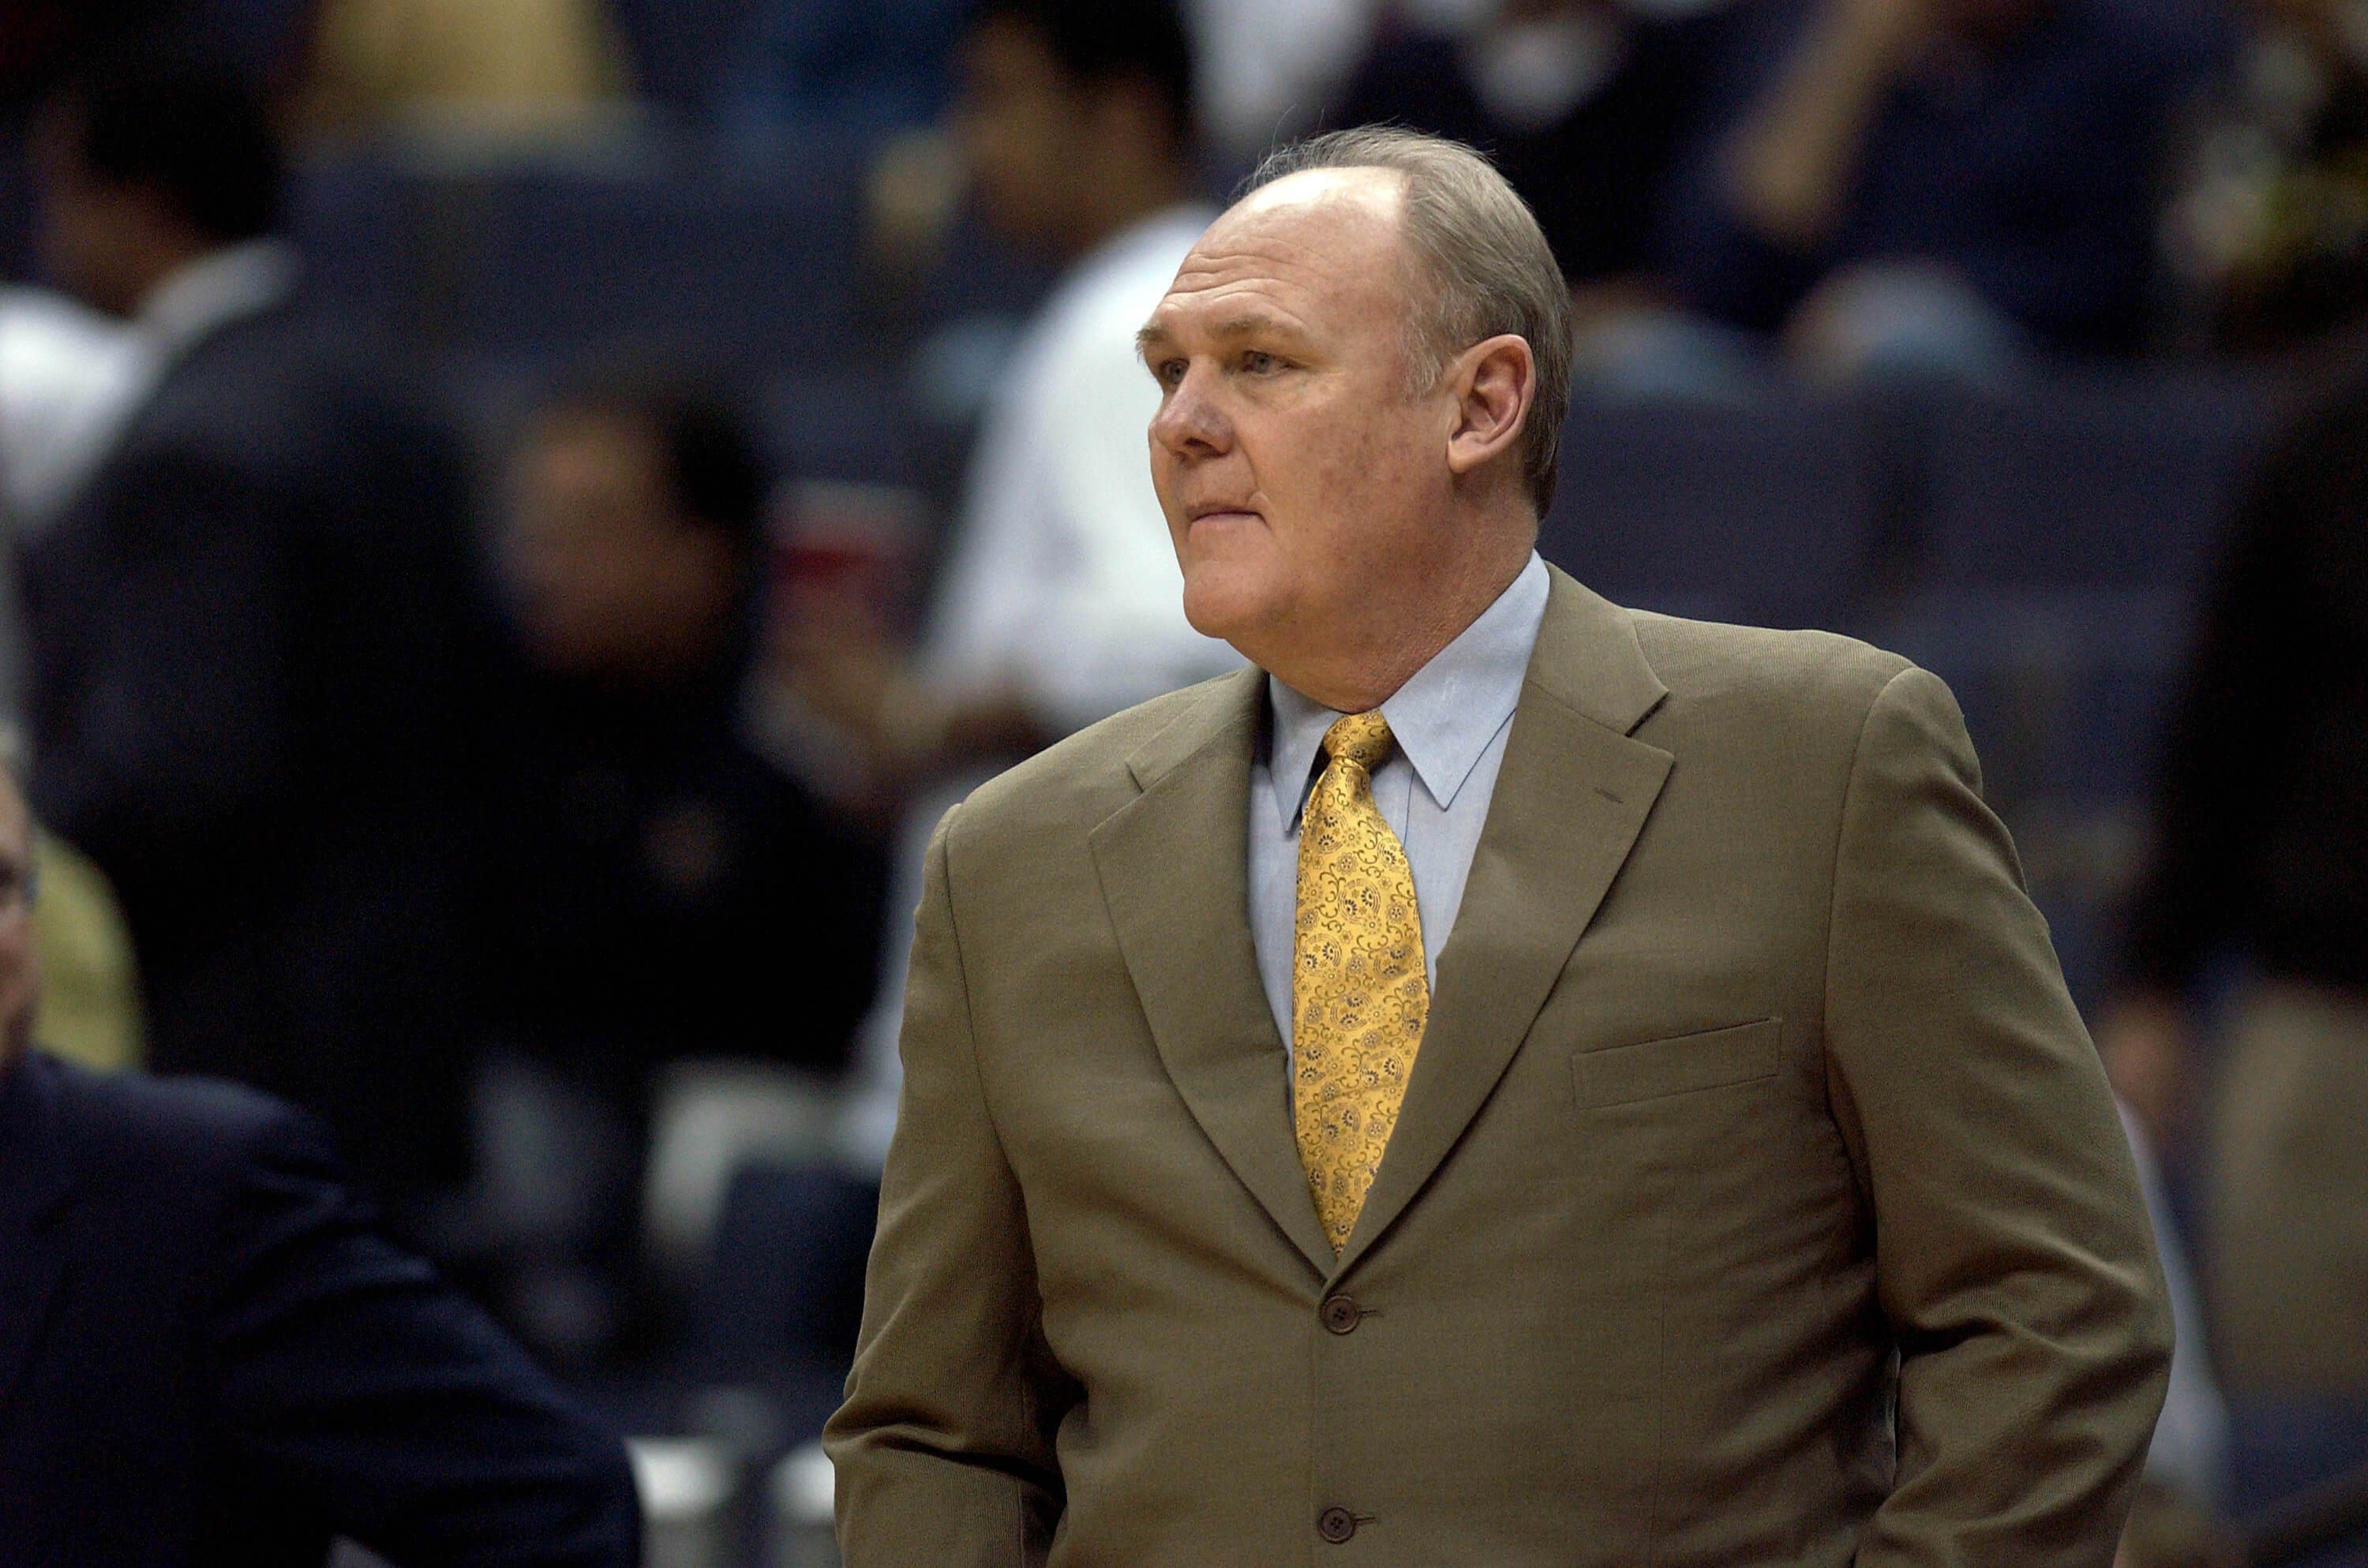 Head coach George Karl of the Denver Nuggets watches the game against the Washington Wizards.